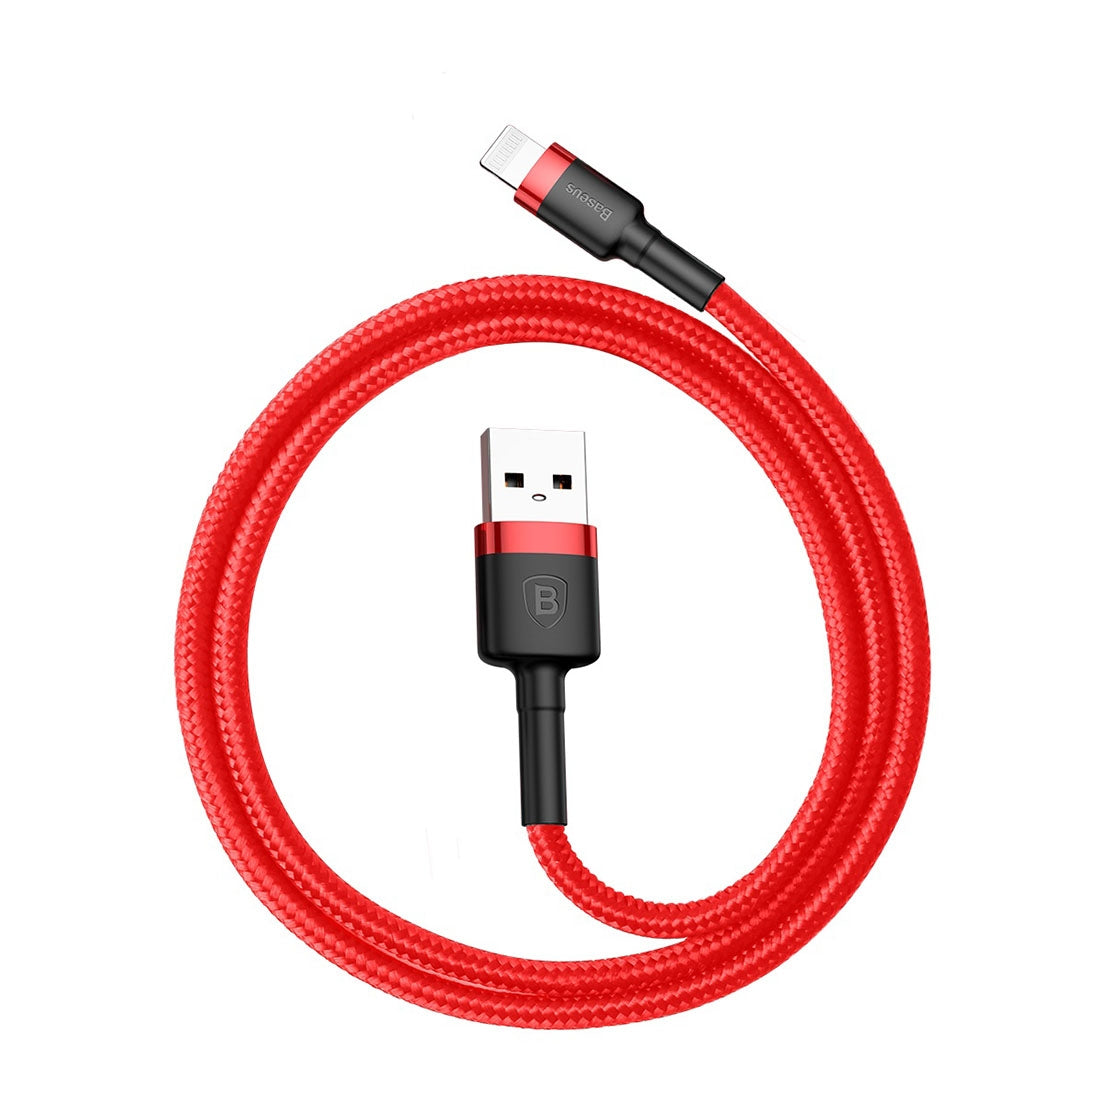 Baseus CALKLF-A09 2.4A 0.5m High Density Nylon Weave USB Cable for Apple 8 Pin, For iPhone XR / iPhone XS MAX / iPhone X & XS / iPhone 8 & 8 Plus / iPhone 7 & 7 Plus / iPhone 6 & 6s & 6 Plus & 6s Plus / iPad(Red)